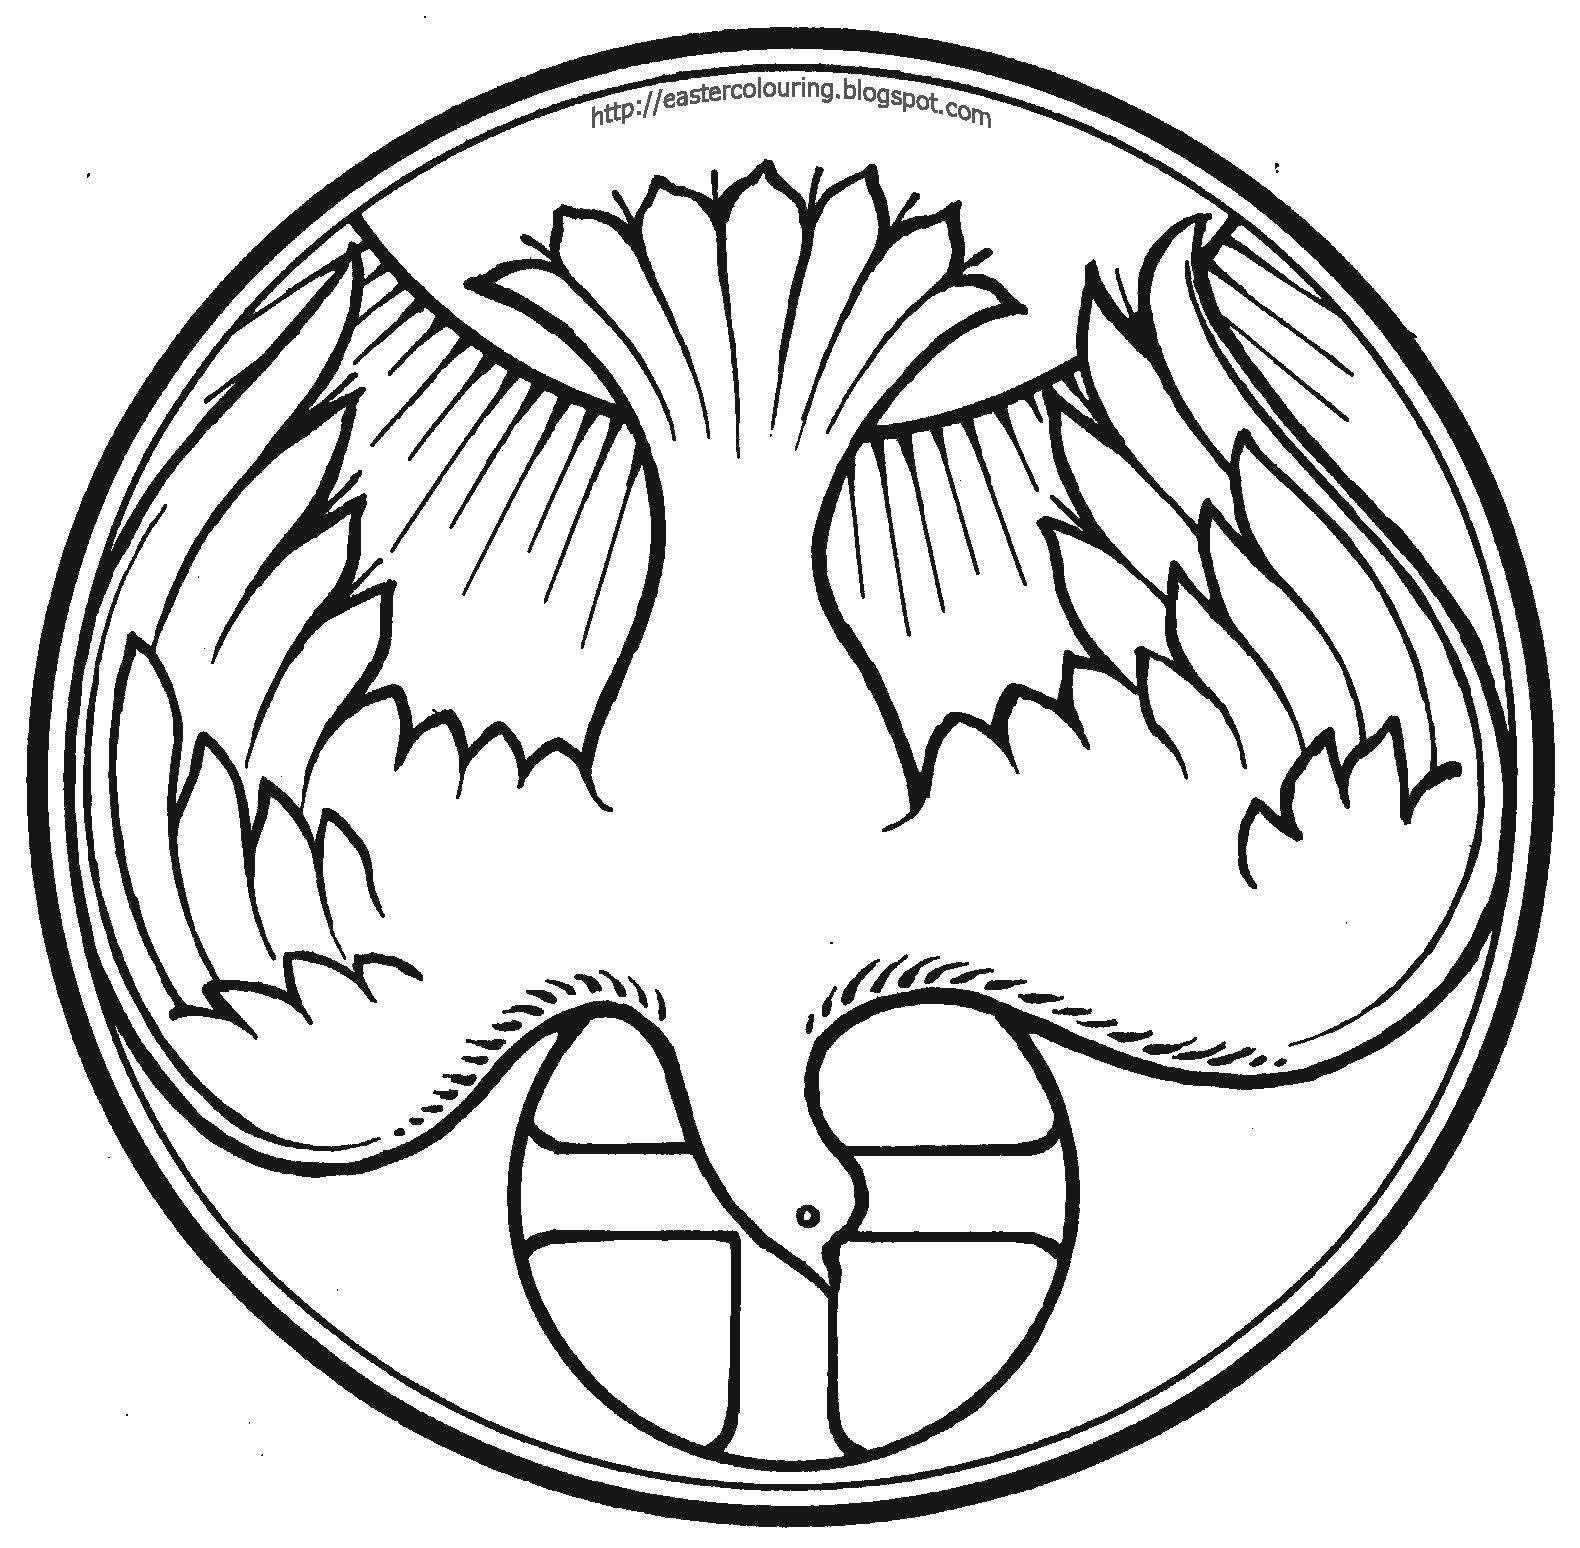 Coloring Dove and cross. Category coloring pages cross. Tags:  Cross.